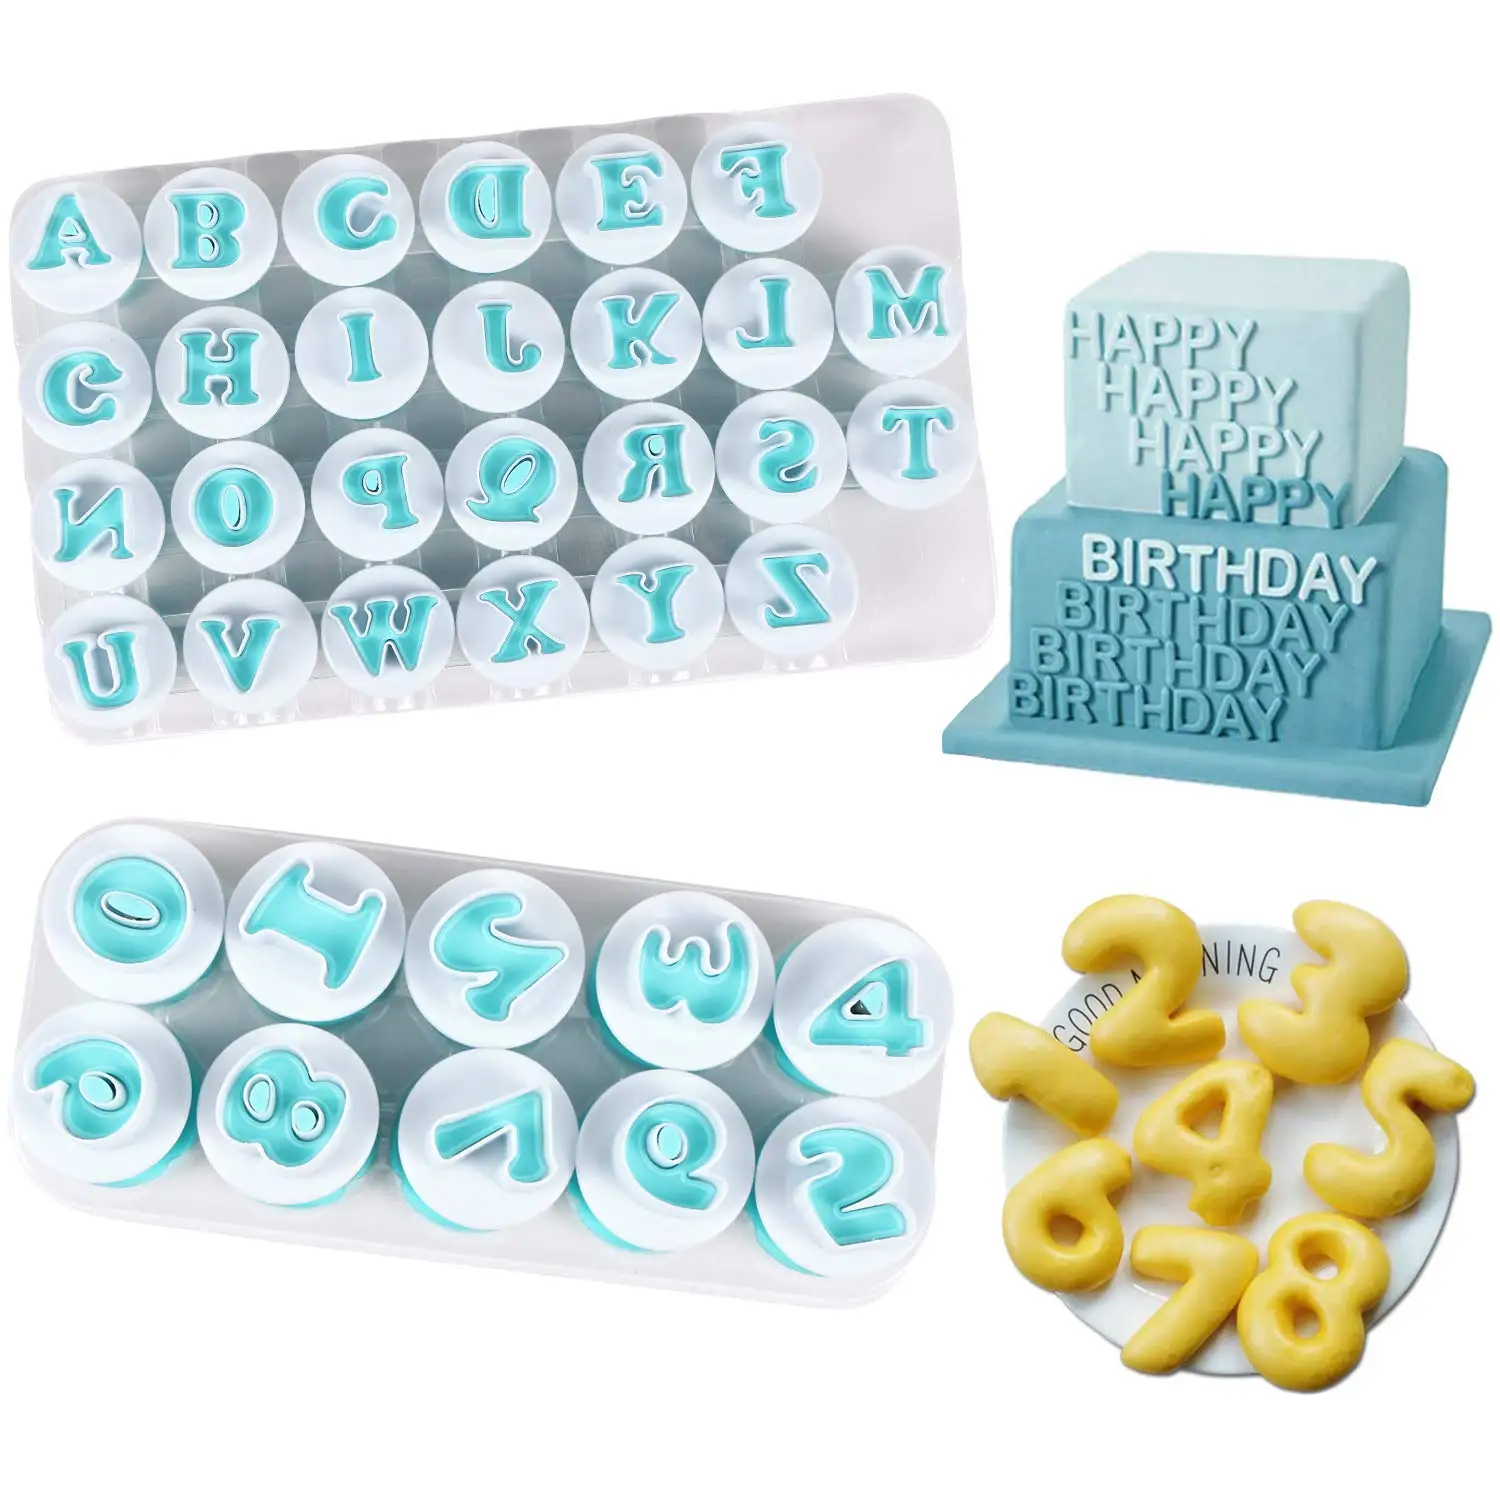 26 Alphabet Letter Style Stamp Cookie Mold Cake Cutter Fondant 